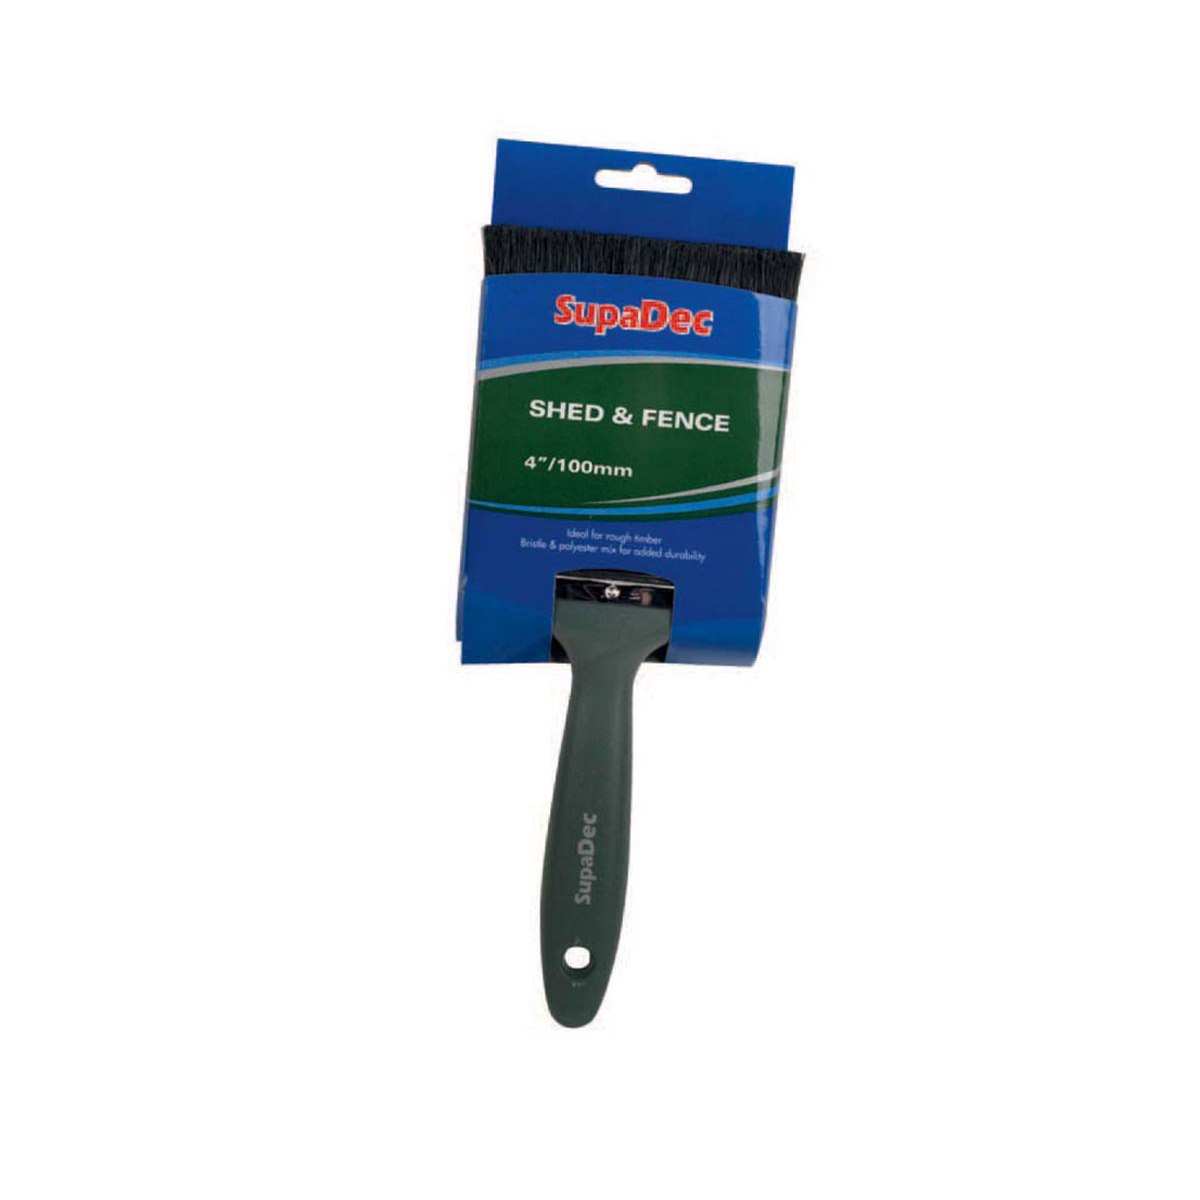 Supadec Shed and Fence Application Brush 4" / 100mm